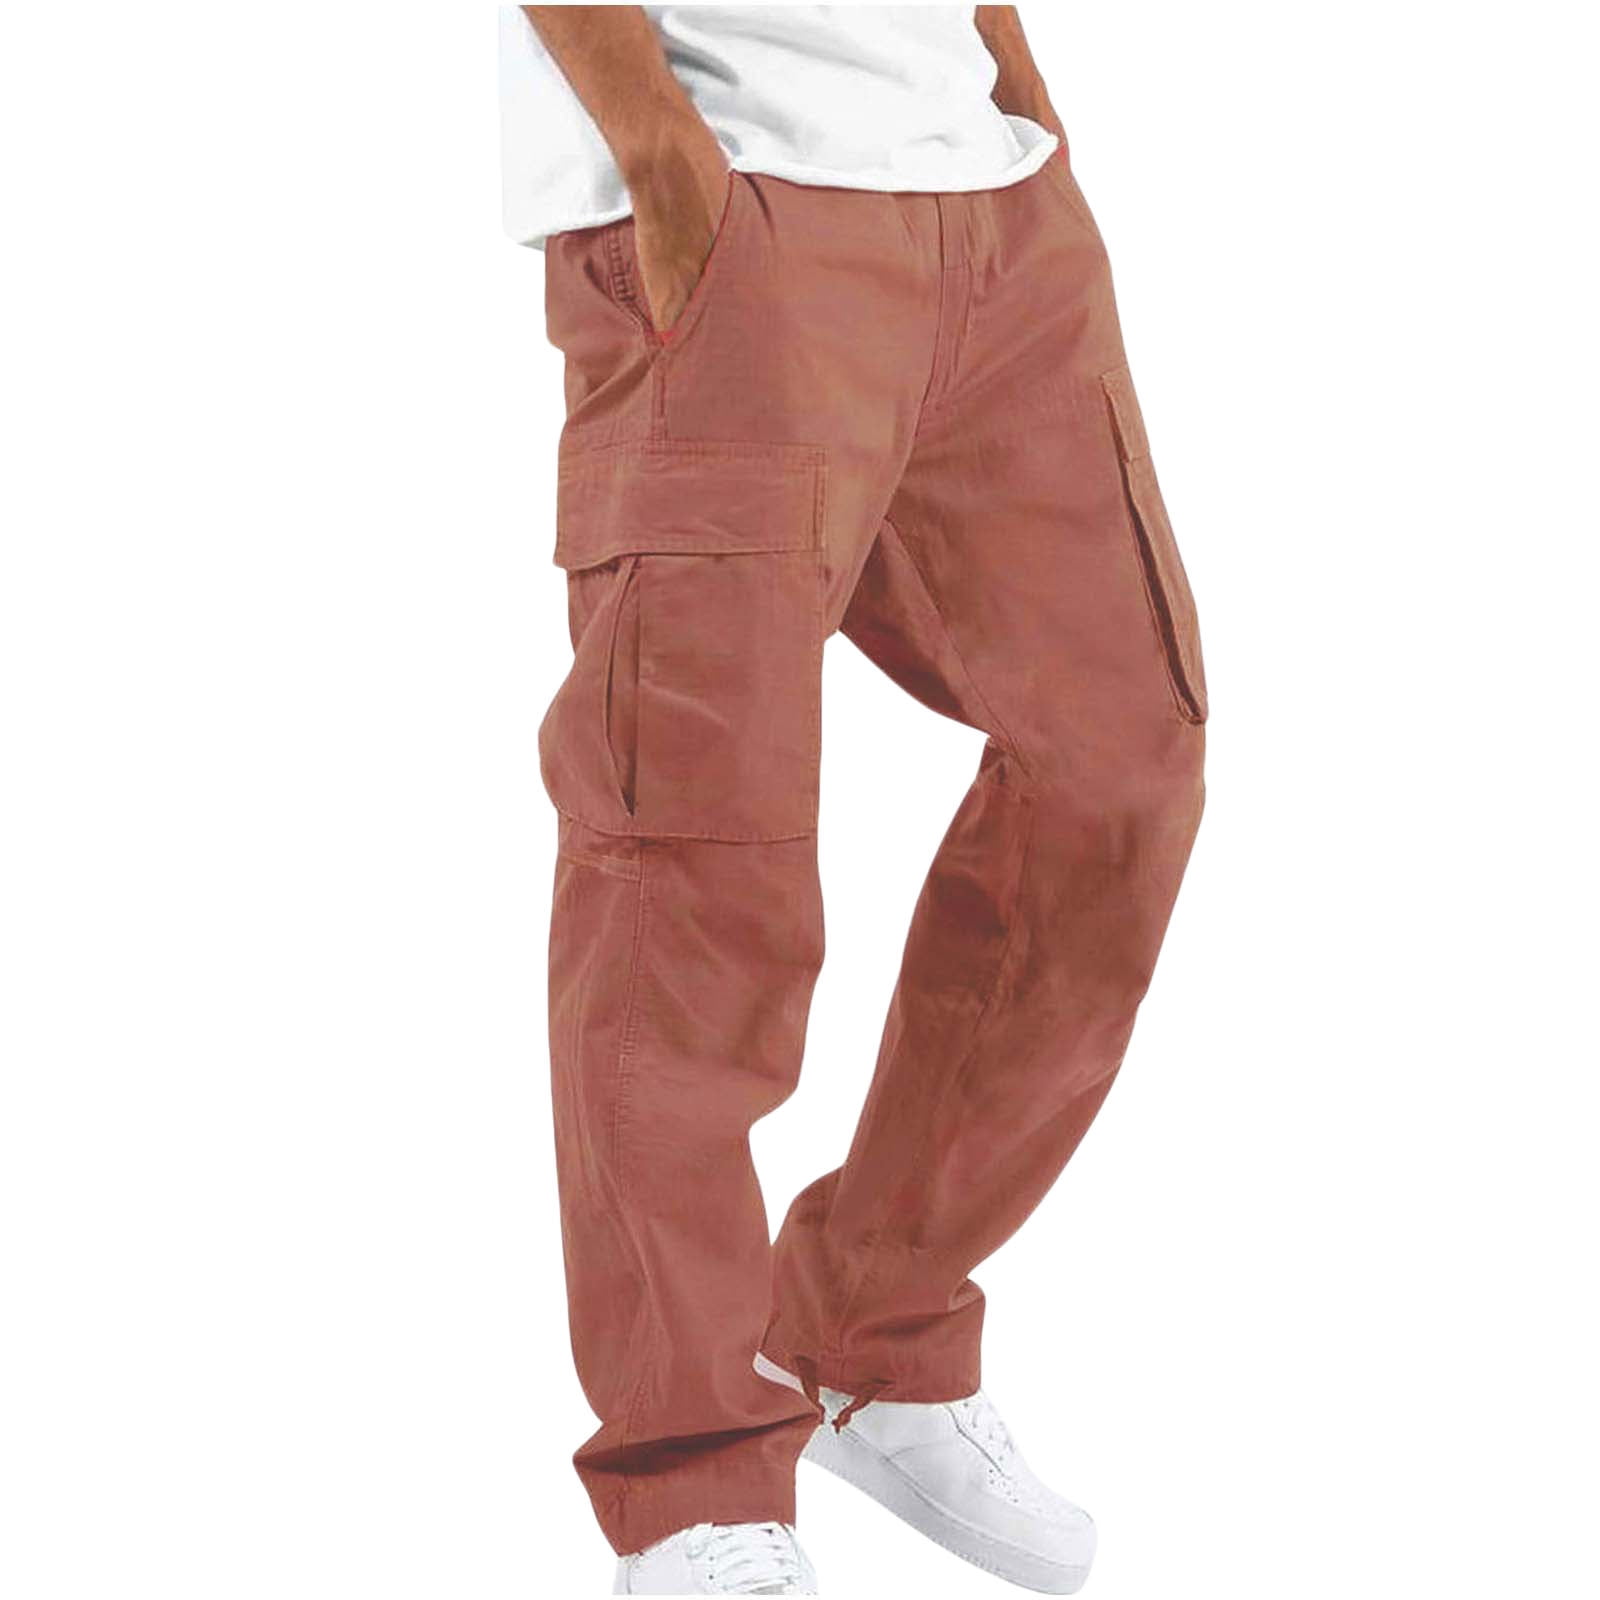 Mens DuluthFlex Fire Hose FleeceLined Relaxed Fit Cargo Work Pants   Duluth Trading Company